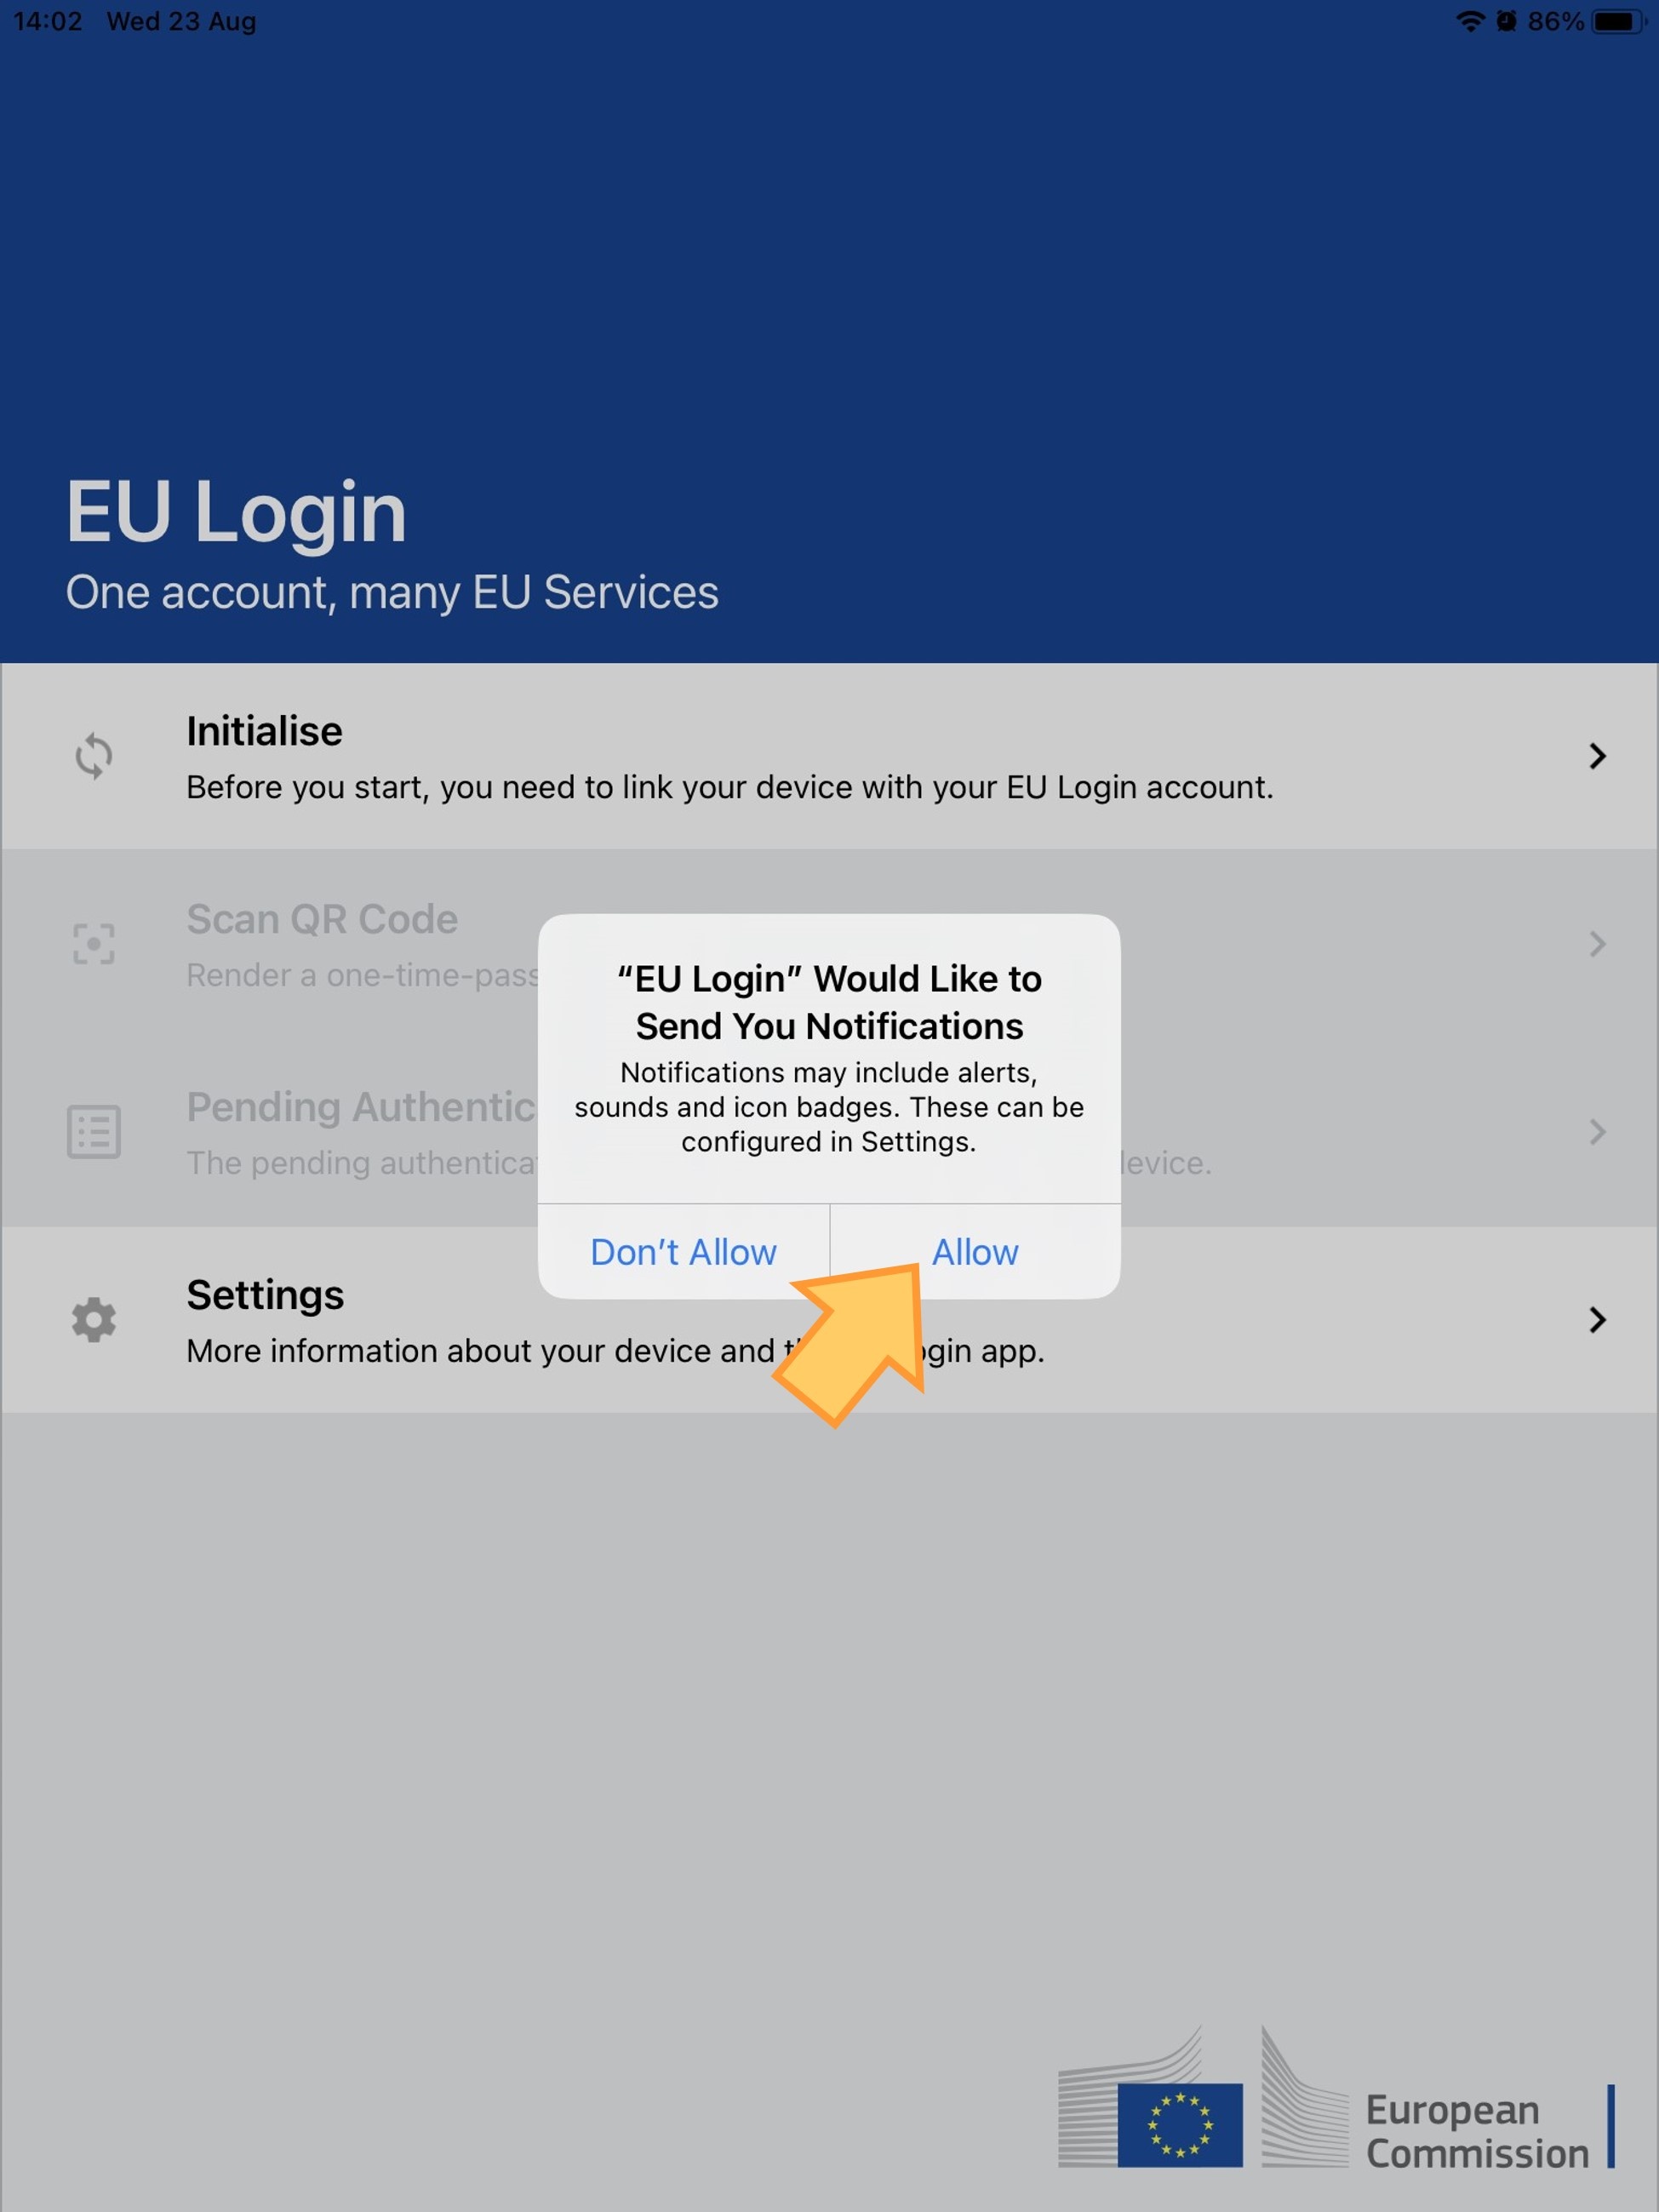 Install EU Login Mobile app and allow notifications